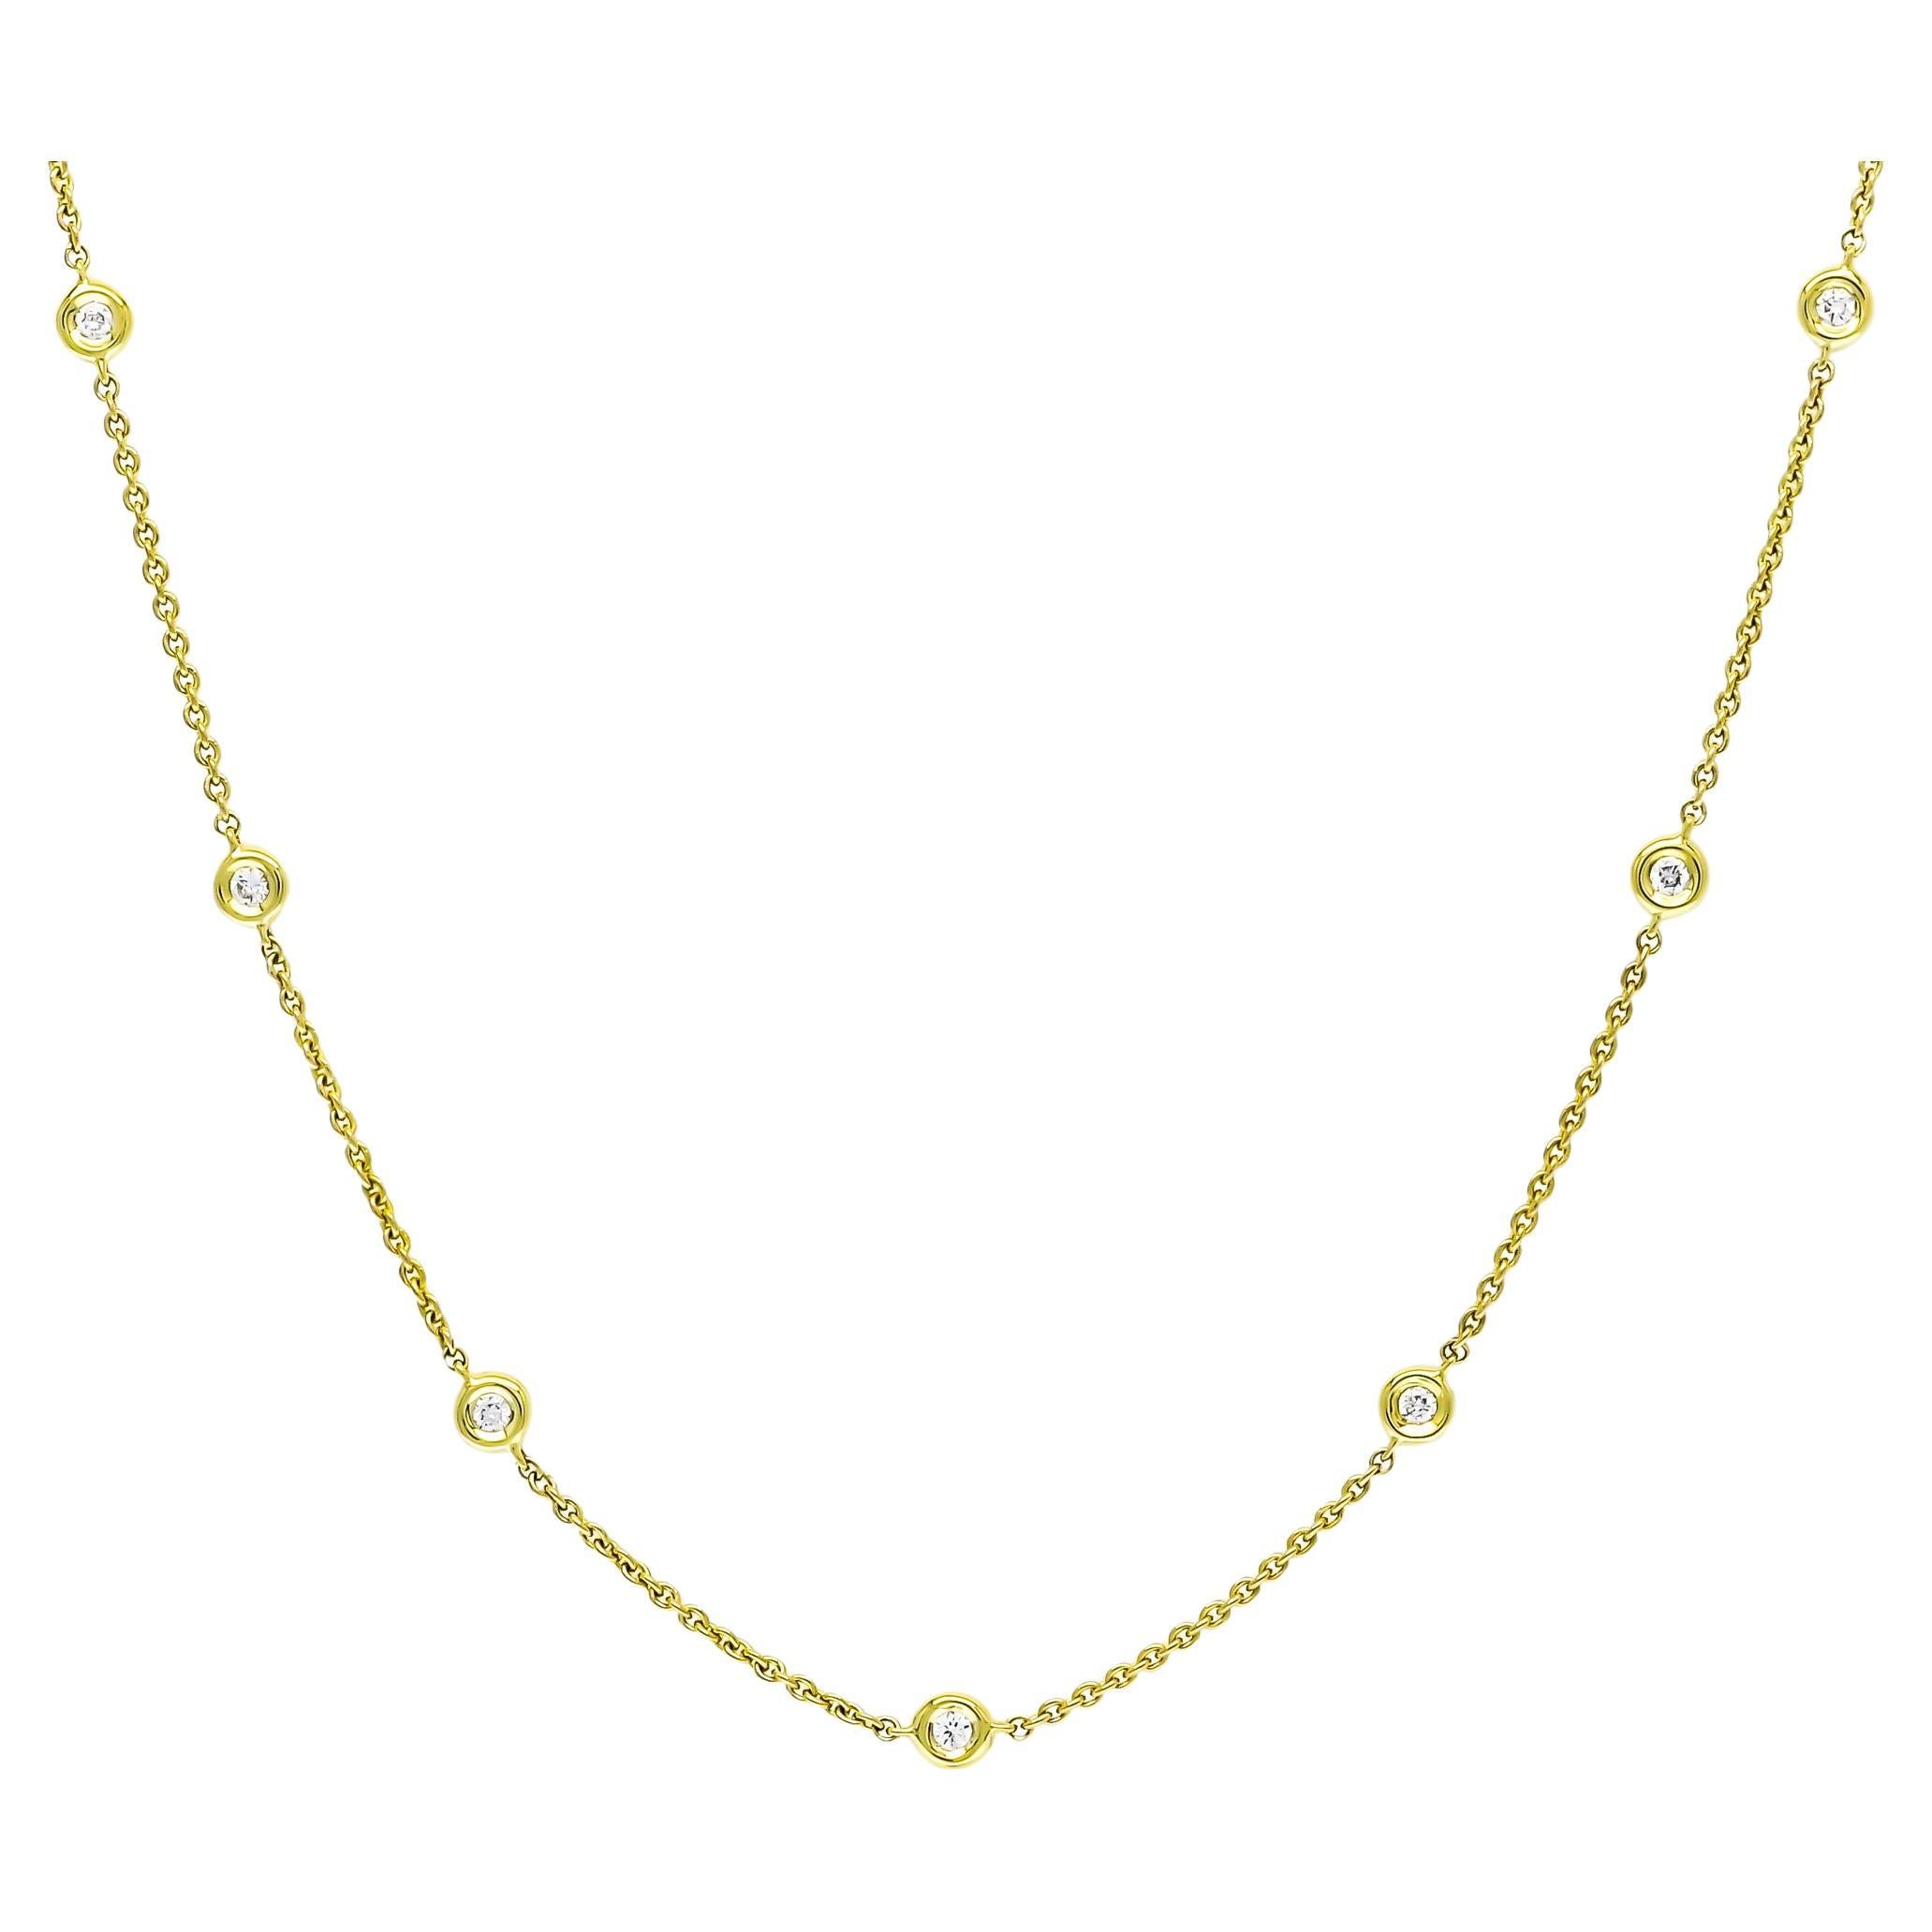  Natural Diamond Chain Necklace 0.35 cts 18 Karat Yellow Gold Chain Necklace For Sale